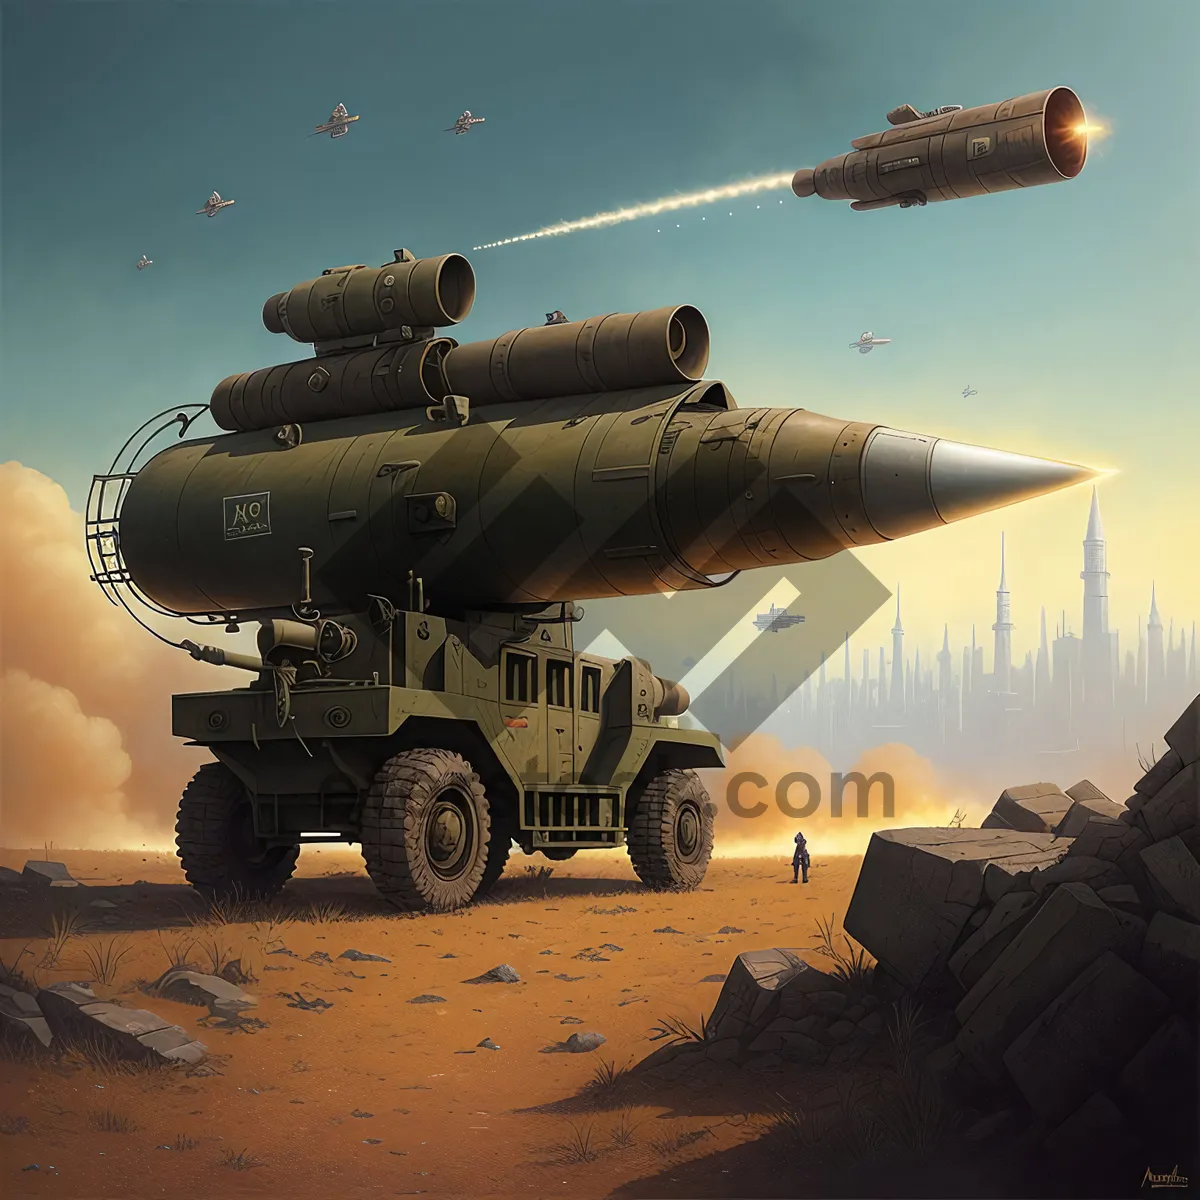 Picture of Skyward Armament: High-Angle Rocket Cannon in Air.